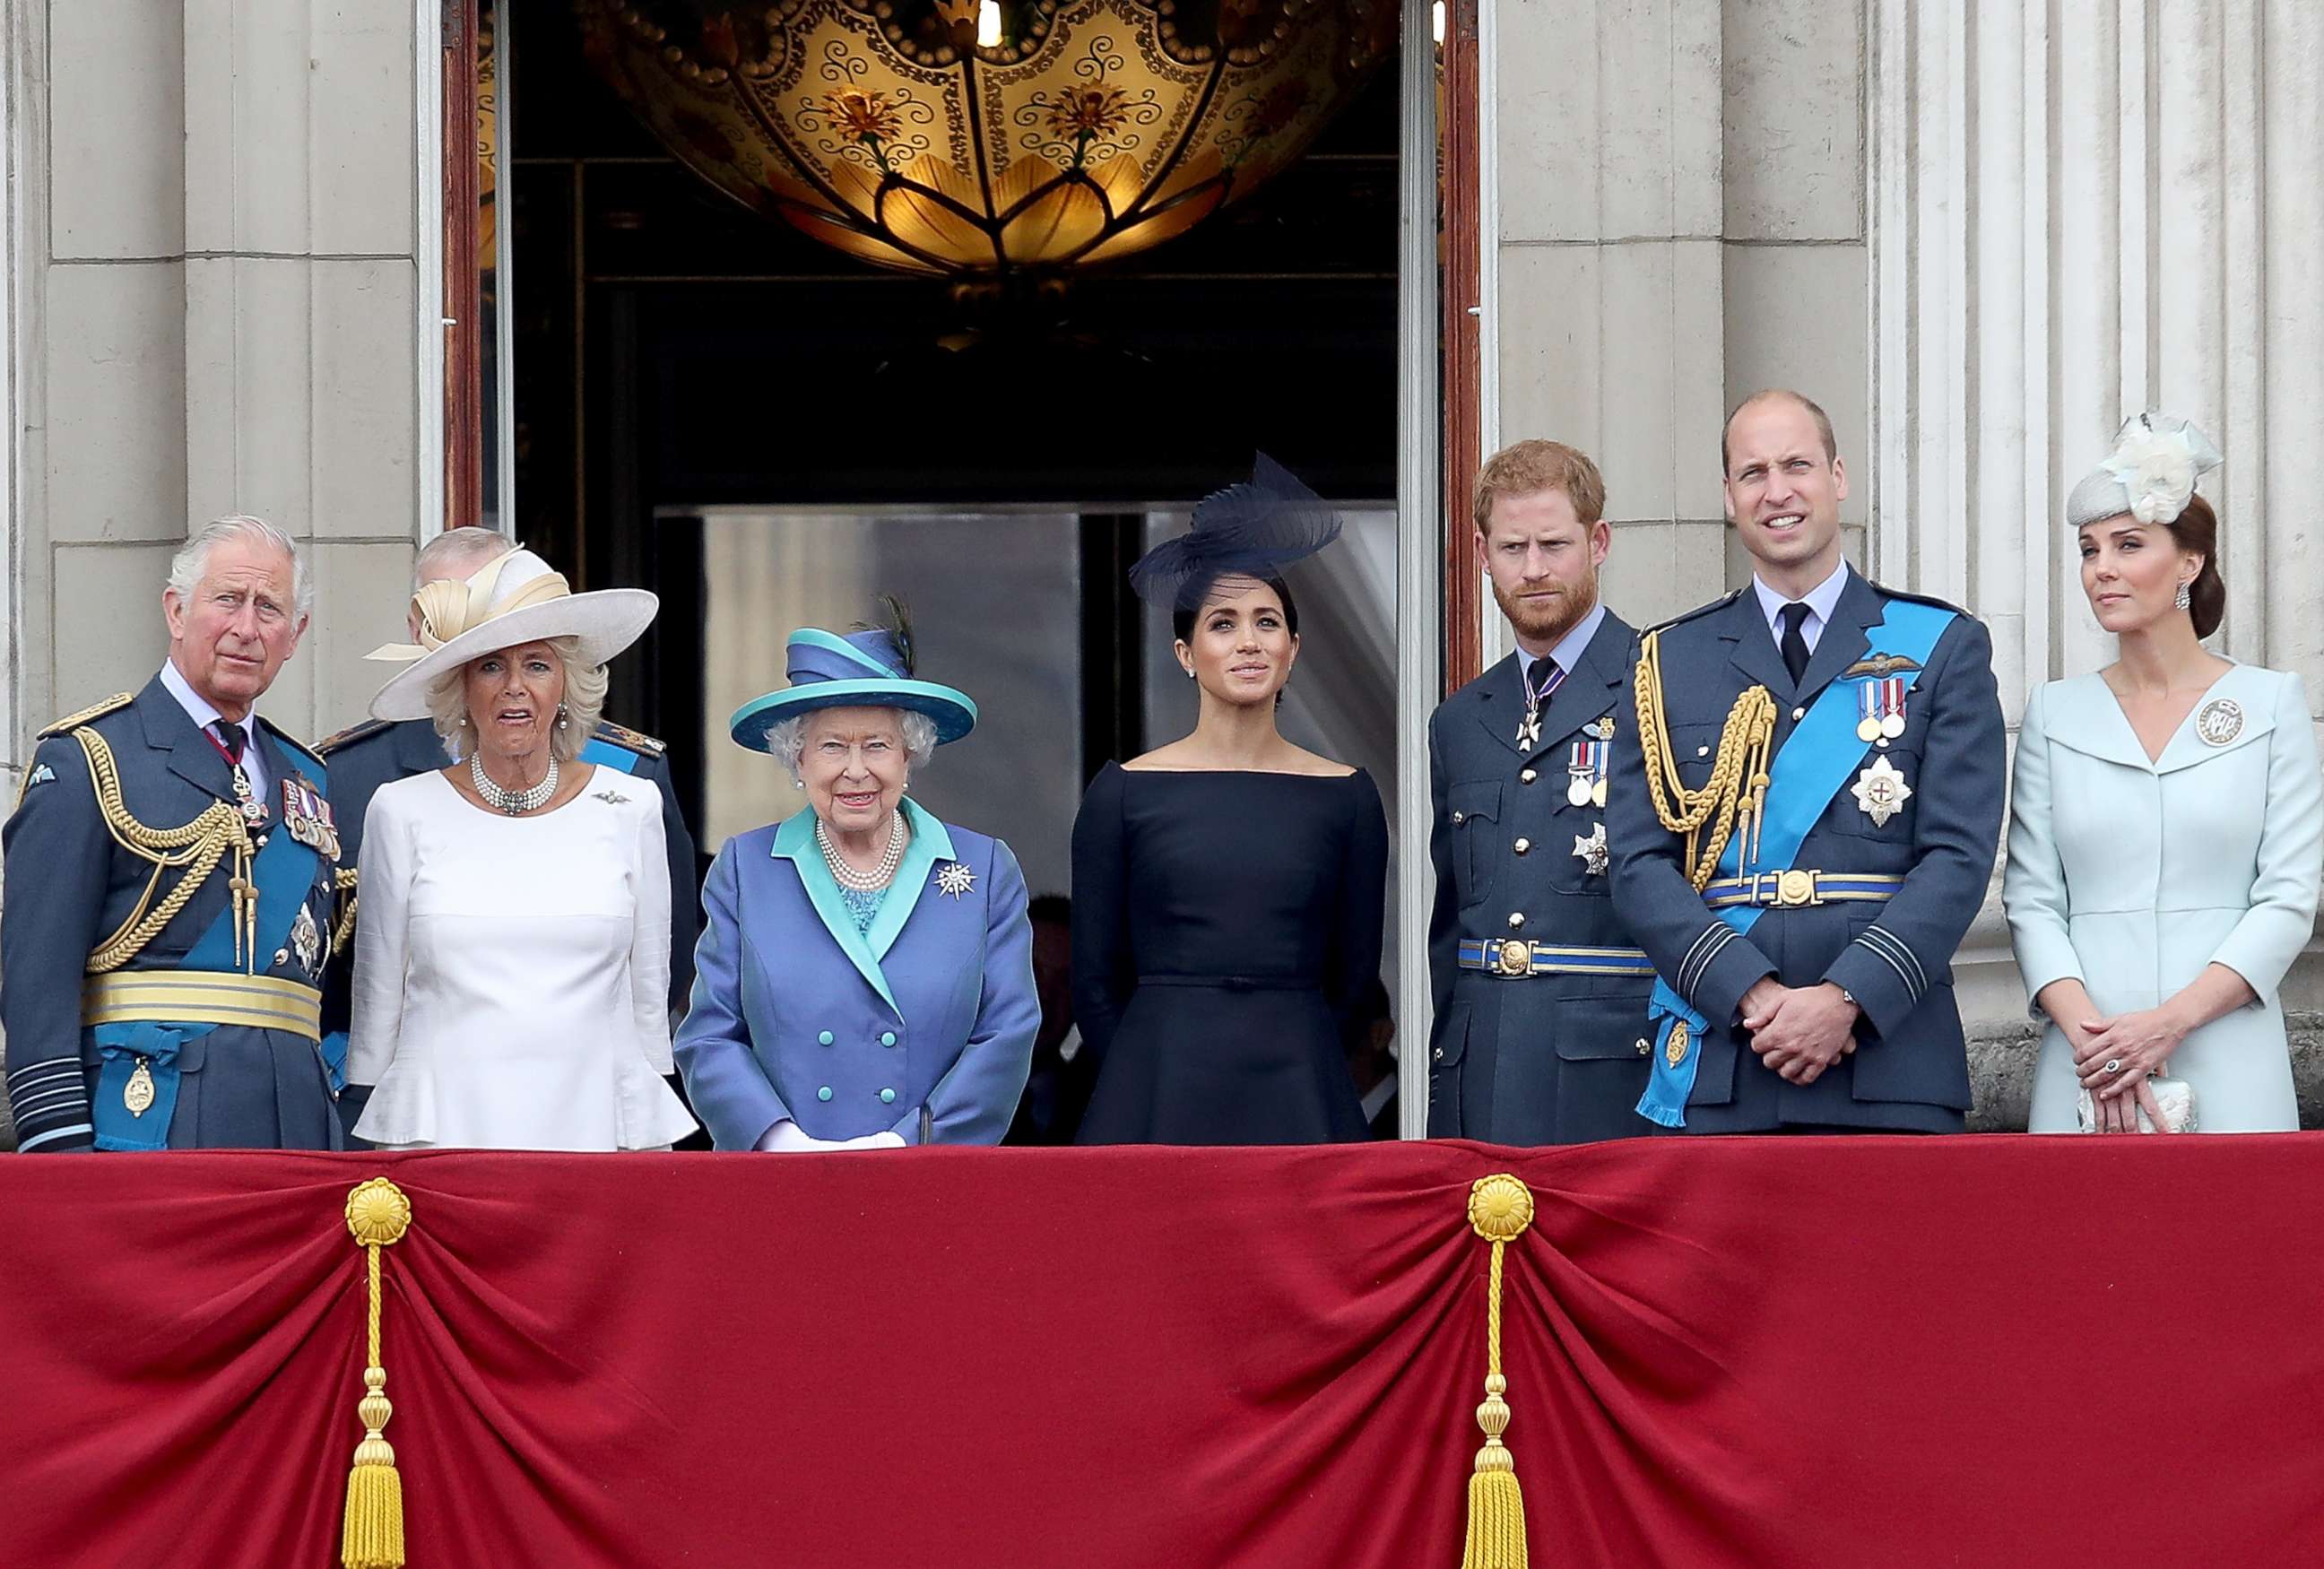 PHOTO: Prince Charles, Camilla, Duchess of Cornwall, Queen Elizabeth II, Meghan, Duchess of Sussex, Prince Harry, Prince William, and Catherine, Duchess of Cambridge watch the RAF flypast on the balcony of Buckingham Palace, July 10, 2018 in London.  